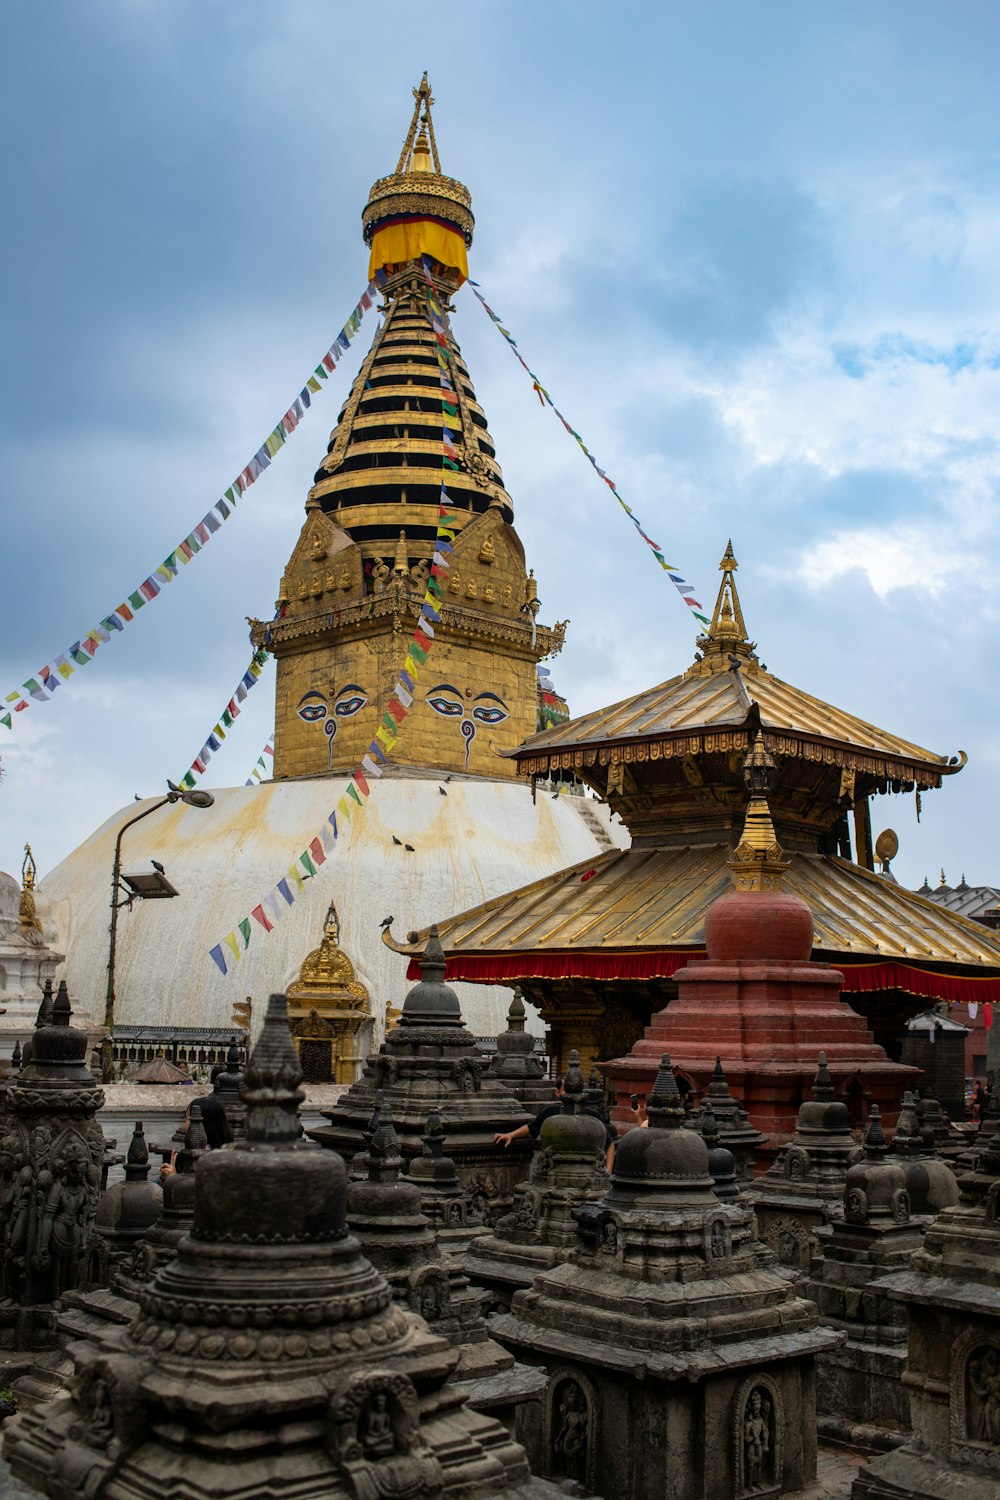 Swayambhunath with a colorful roof